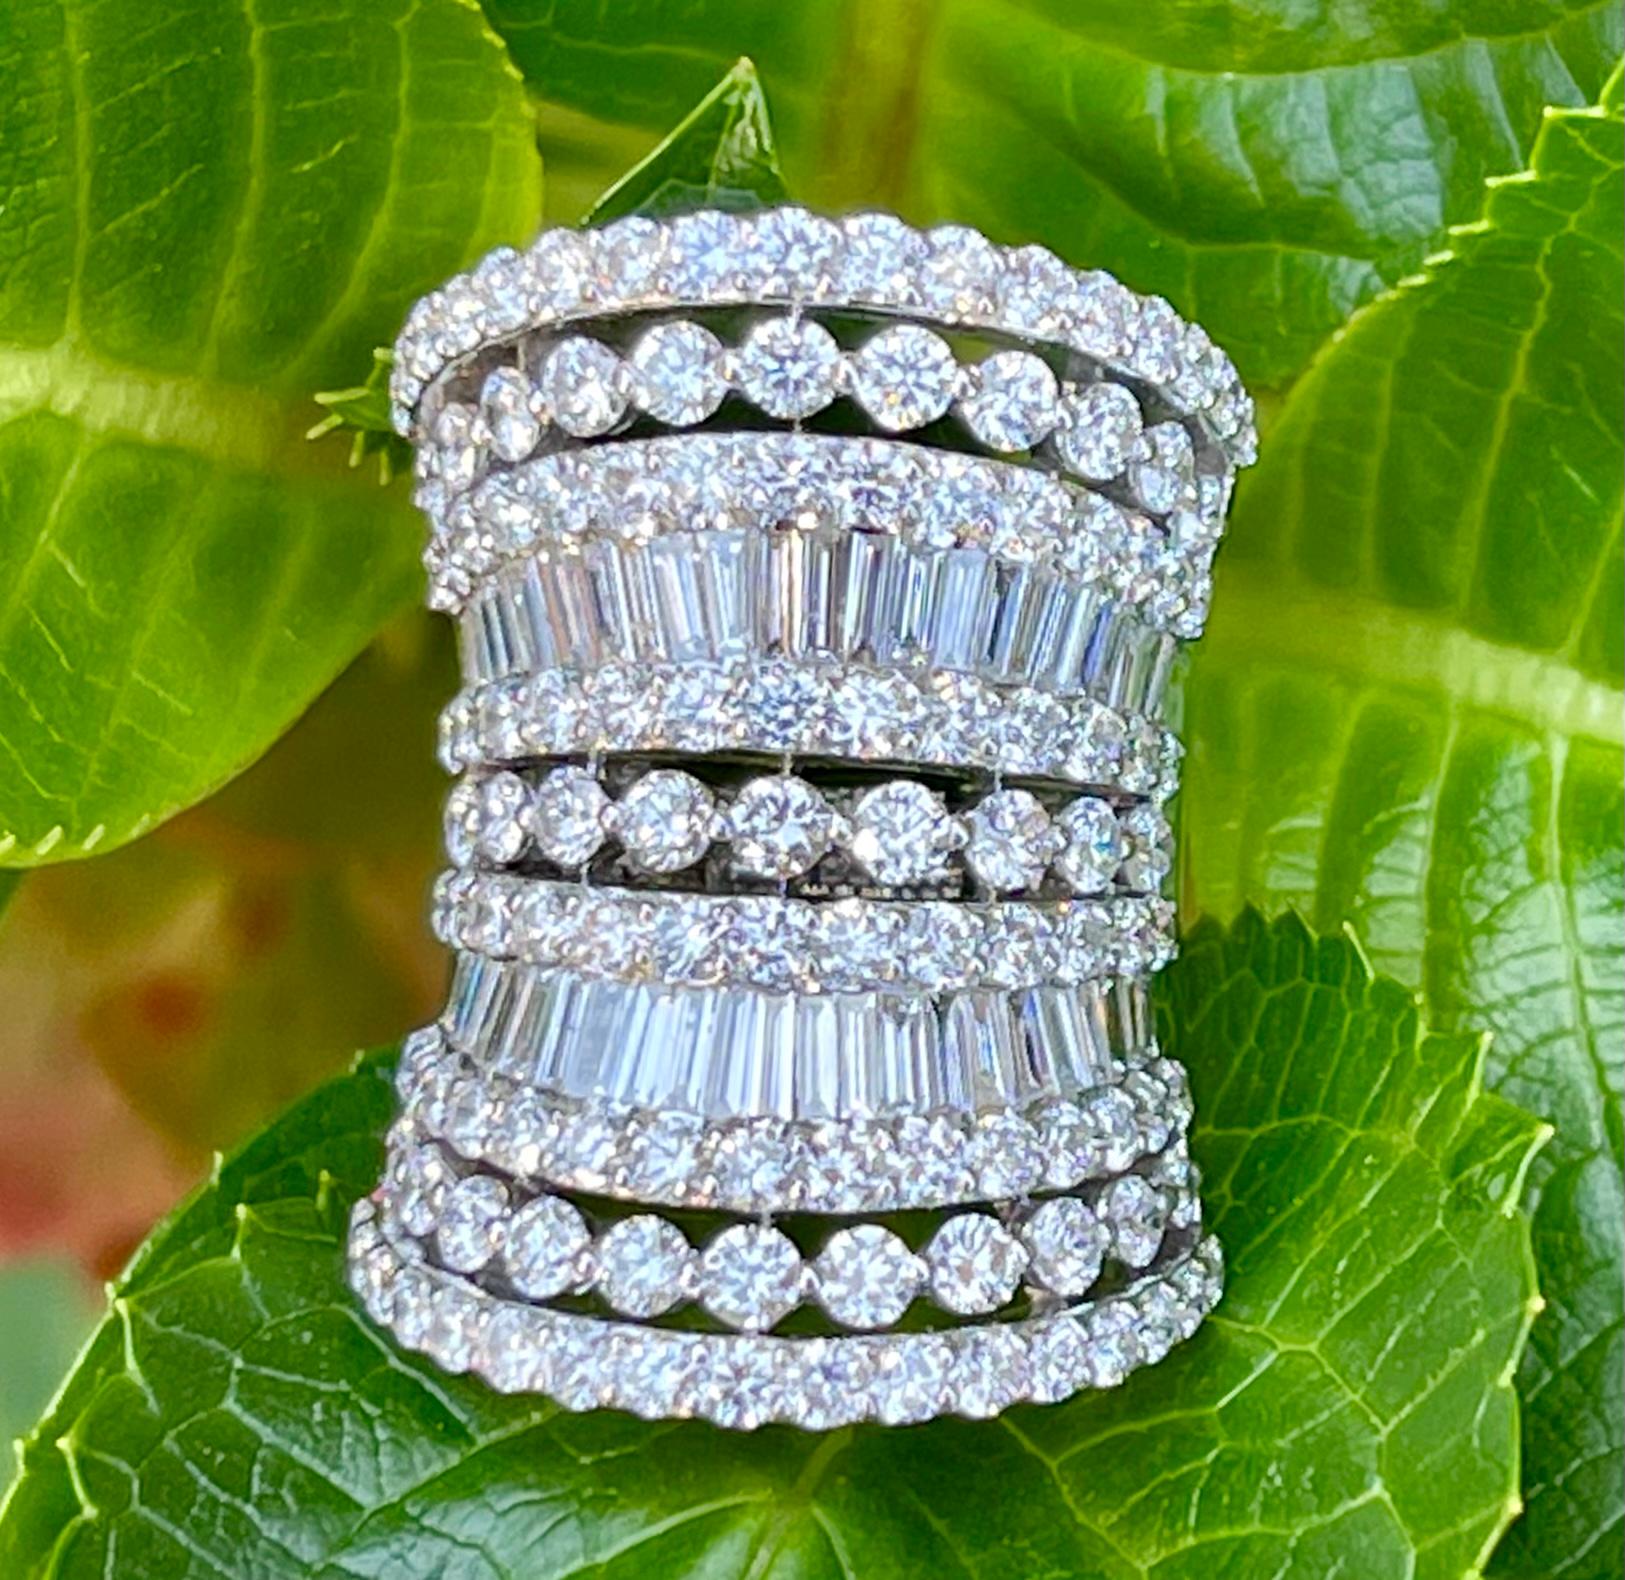 Absolutely stunning, glorious 7 layer curving diamond band ring features seven rows of round brilliant and baguette cut diamonds.  The baguette diamonds are invisibly set in between rows of round brilliant diamonds on each side.  The repetitive